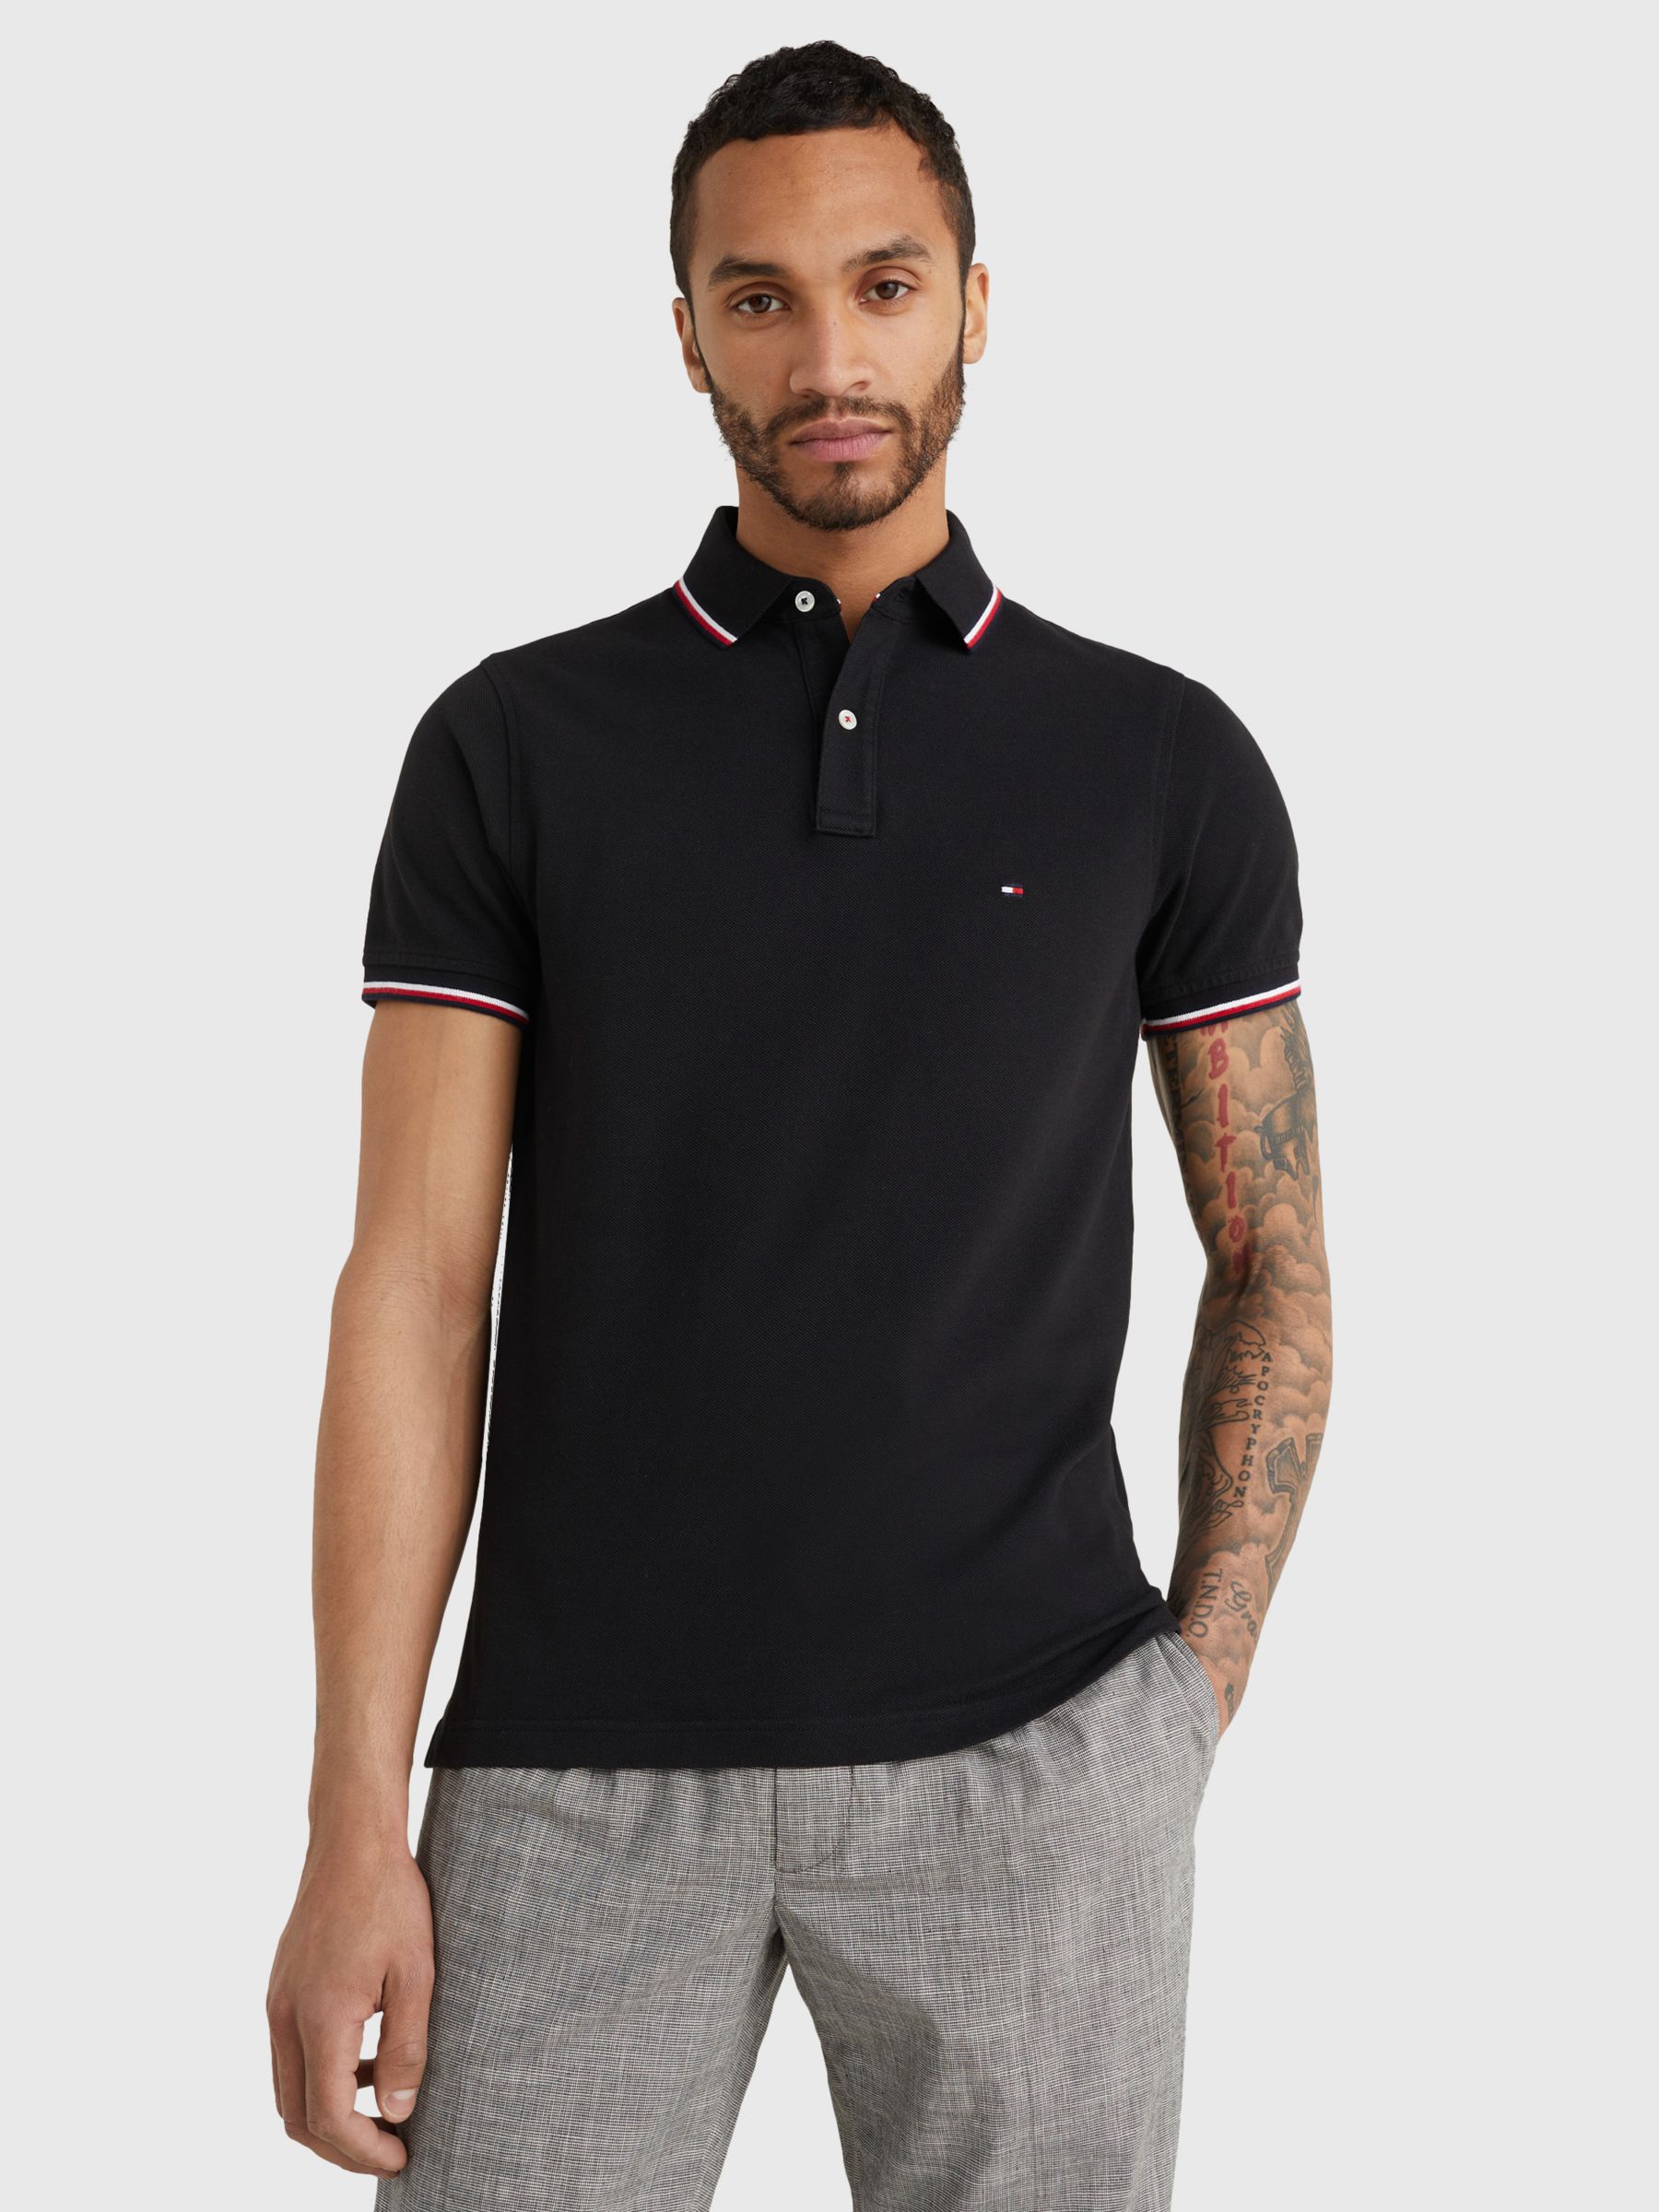 Tommy Hilfiger Tipped Organic Cotton Slim Fit Polo Shirt, Black at John  Lewis & Partners